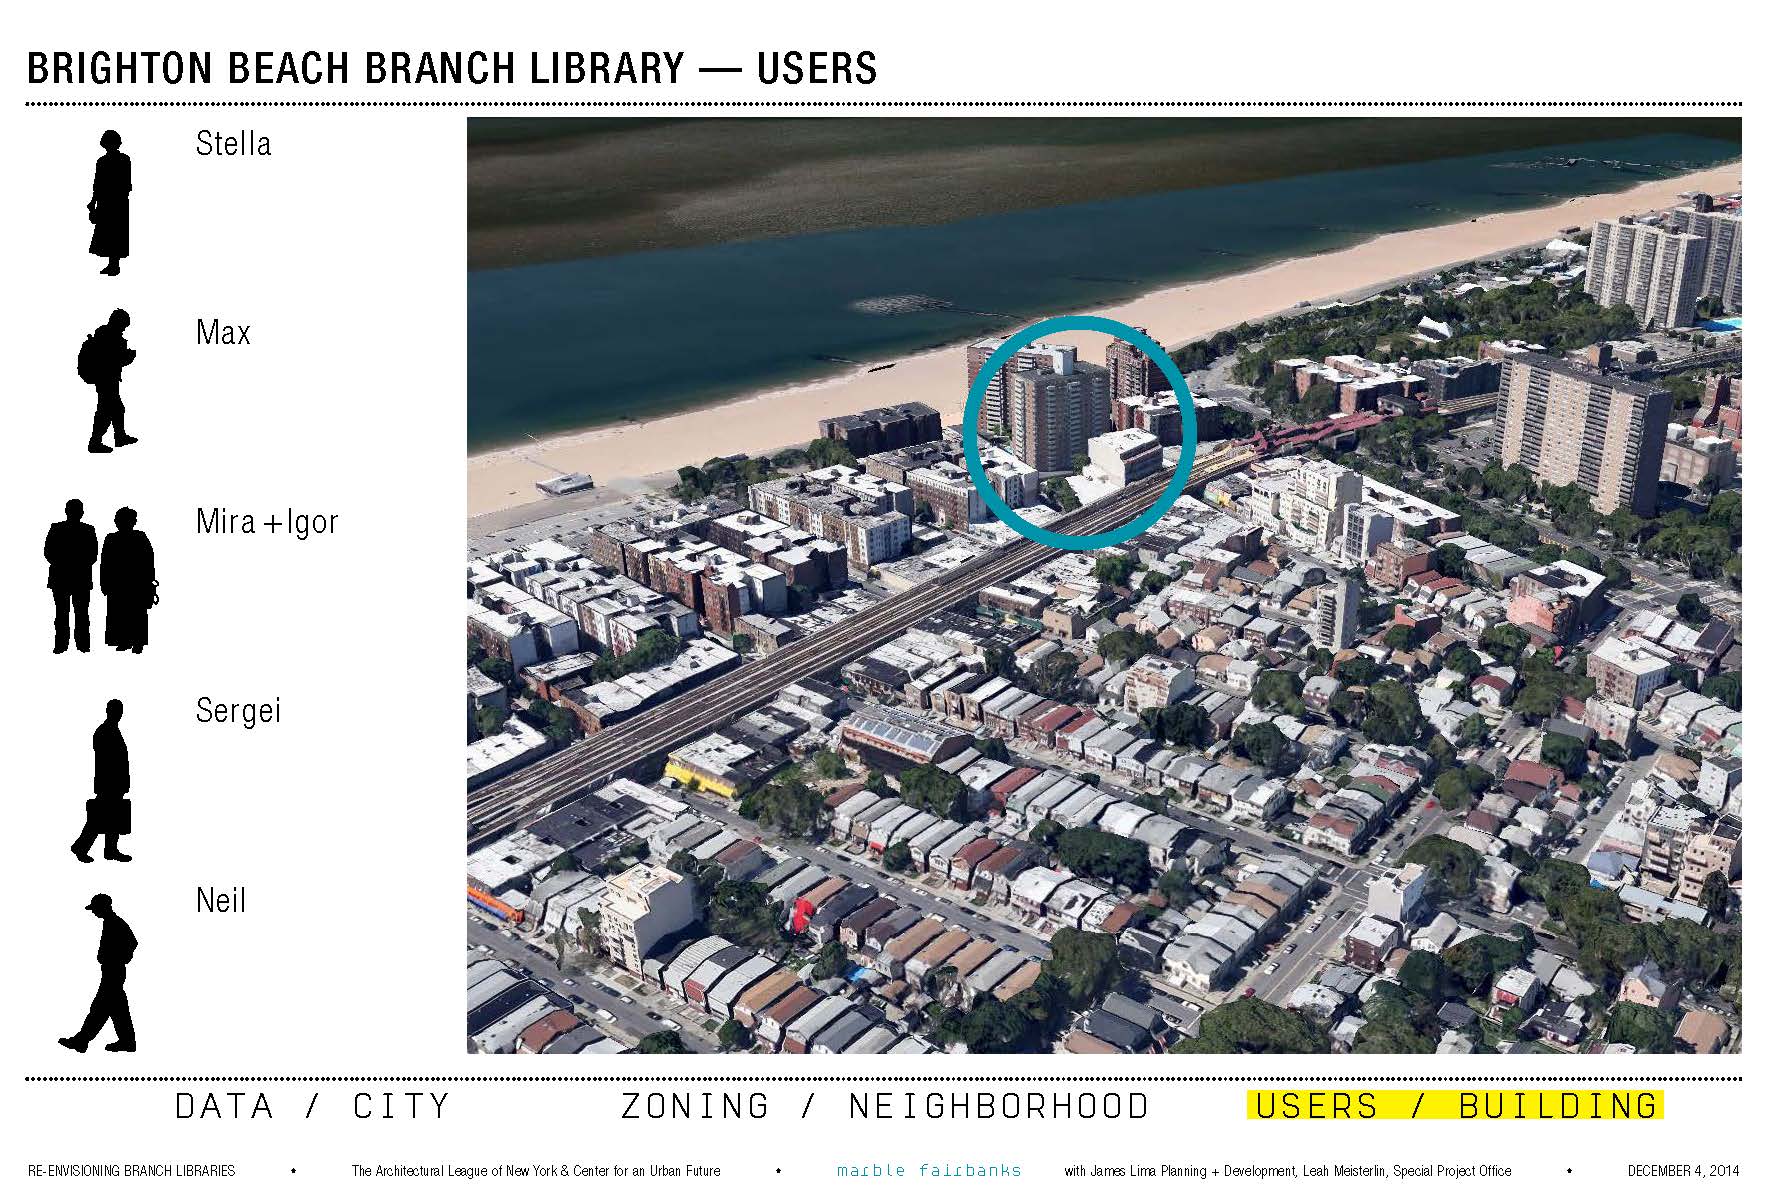 Marble Fairbanks_Re-Envisioning Branch Libraries_with citations small_Page_55.jpg